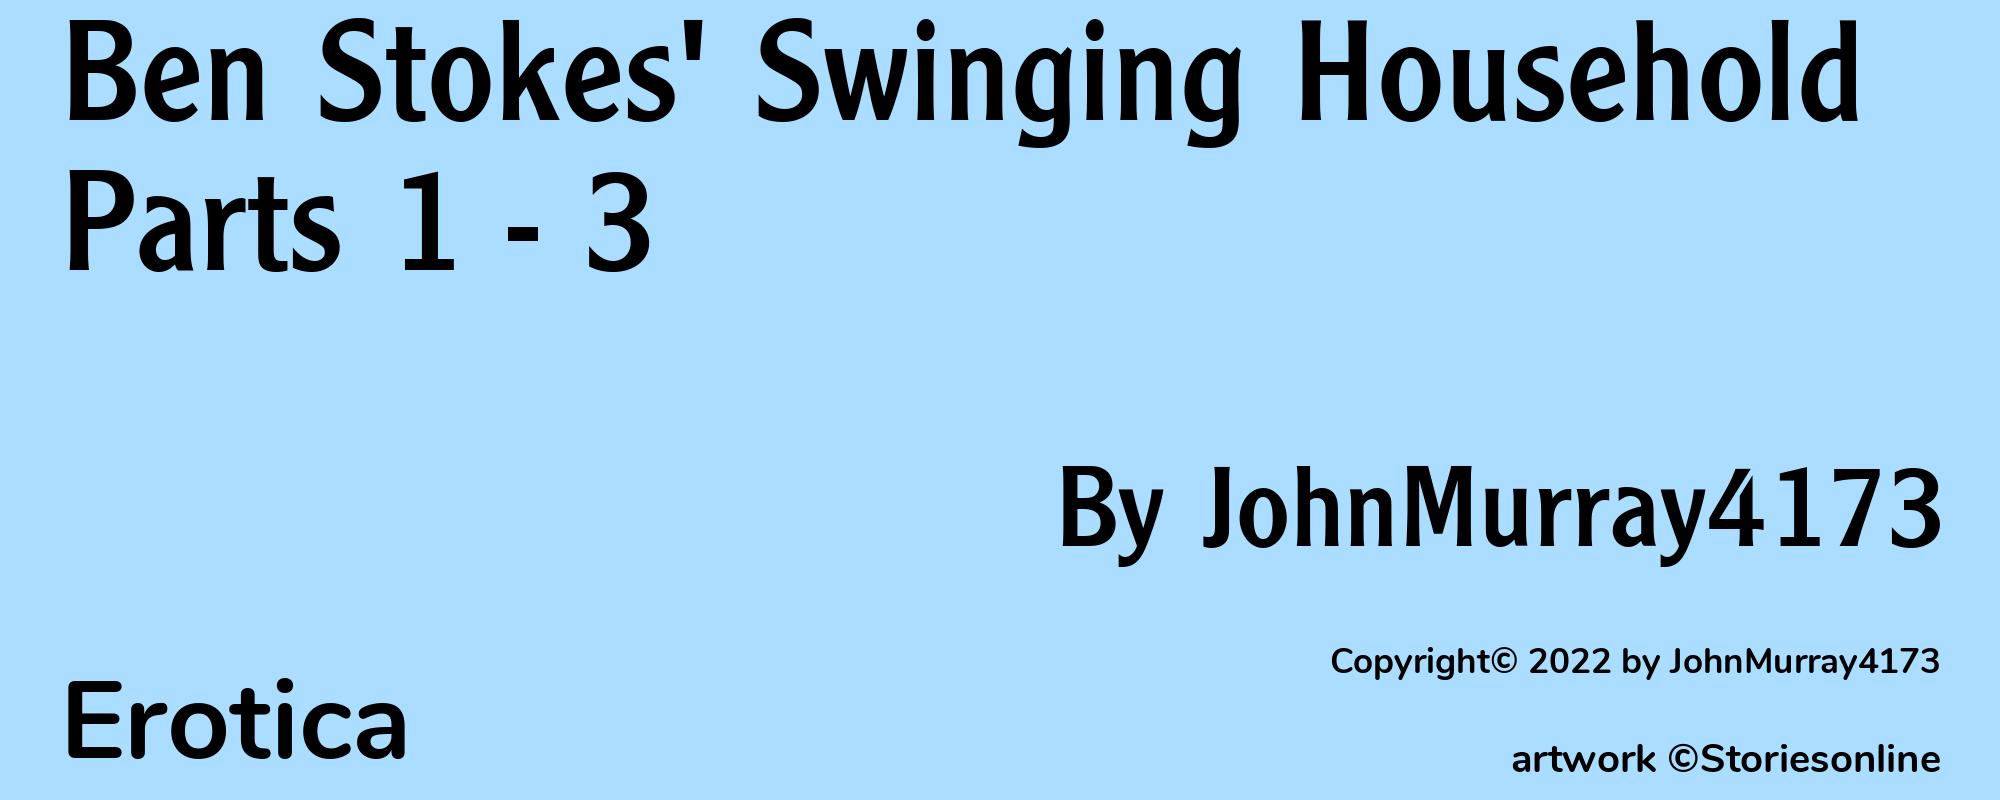 Ben Stokes' Swinging Household Parts 1 - 3 - Cover